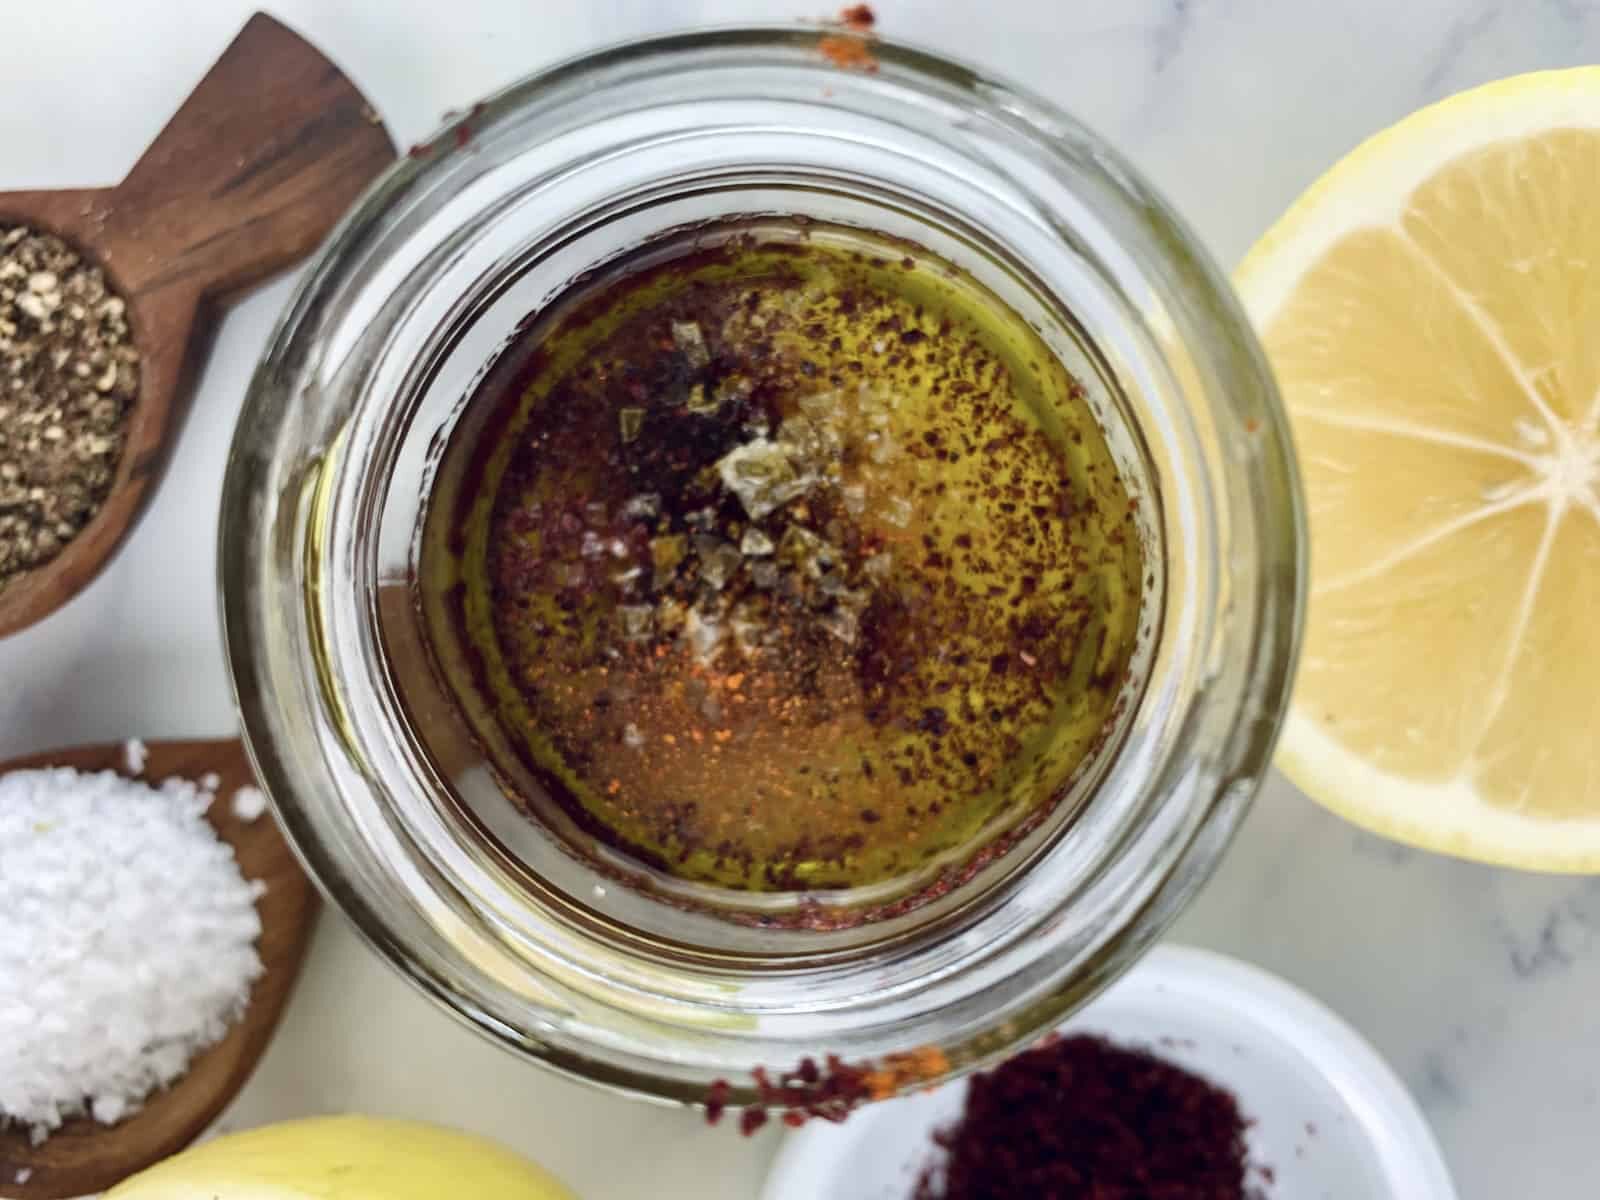 Sumac vinaigrette ingredients in a glass jar with ingredients scattered around.